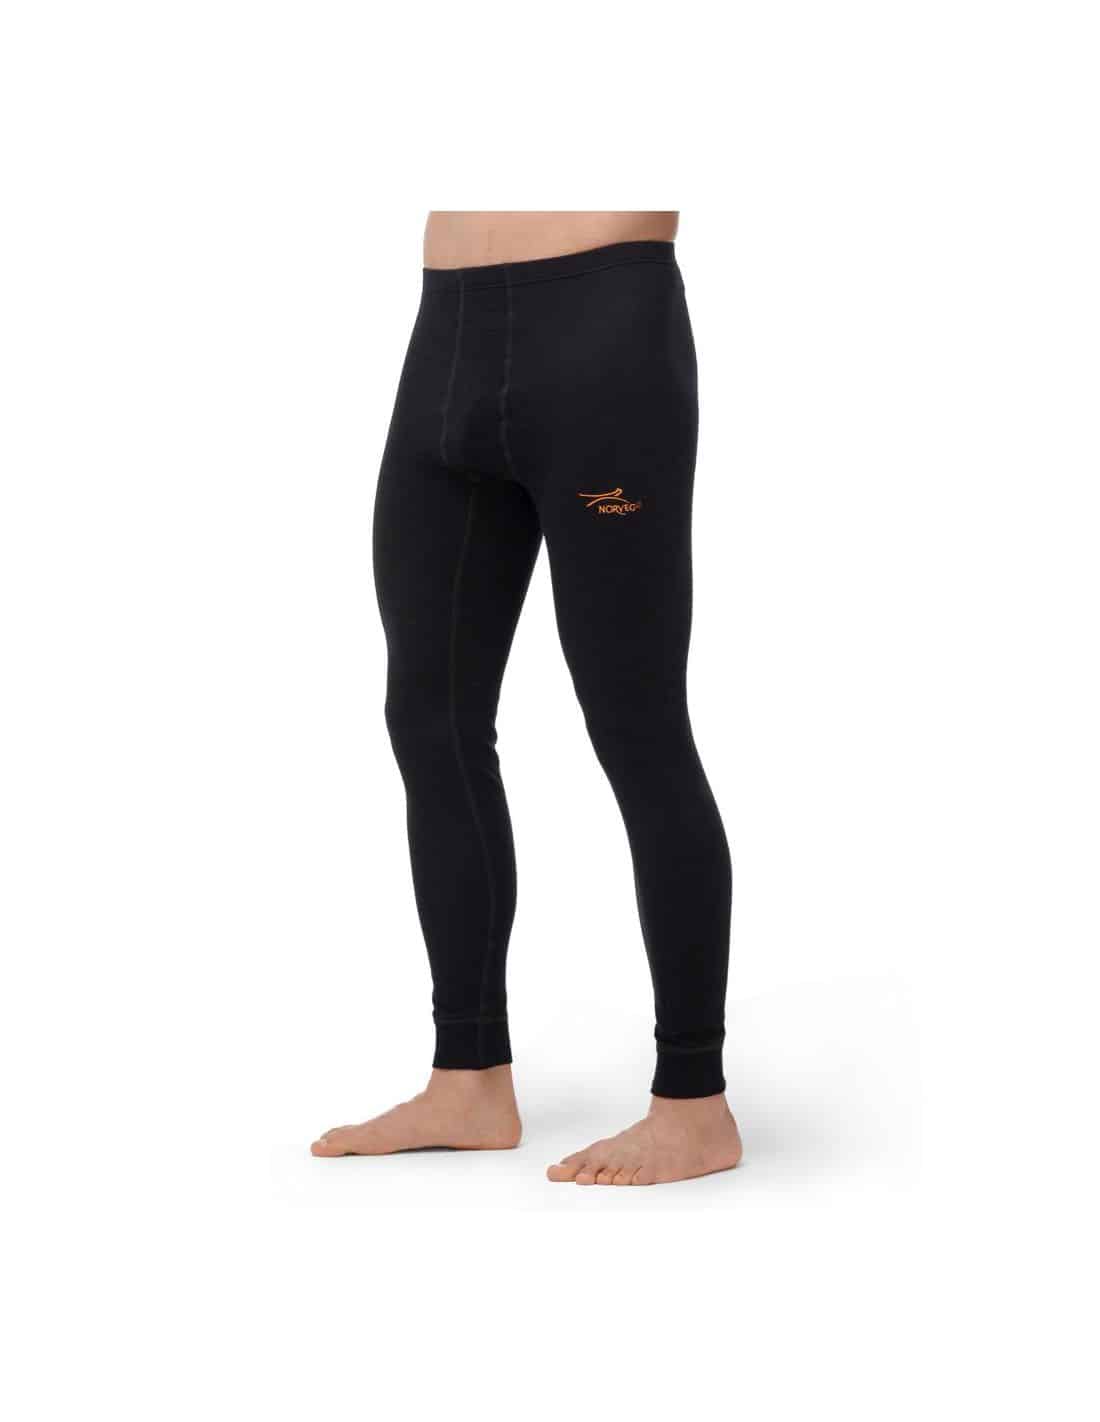 The best thermal underwear for men in extreme cold conditions